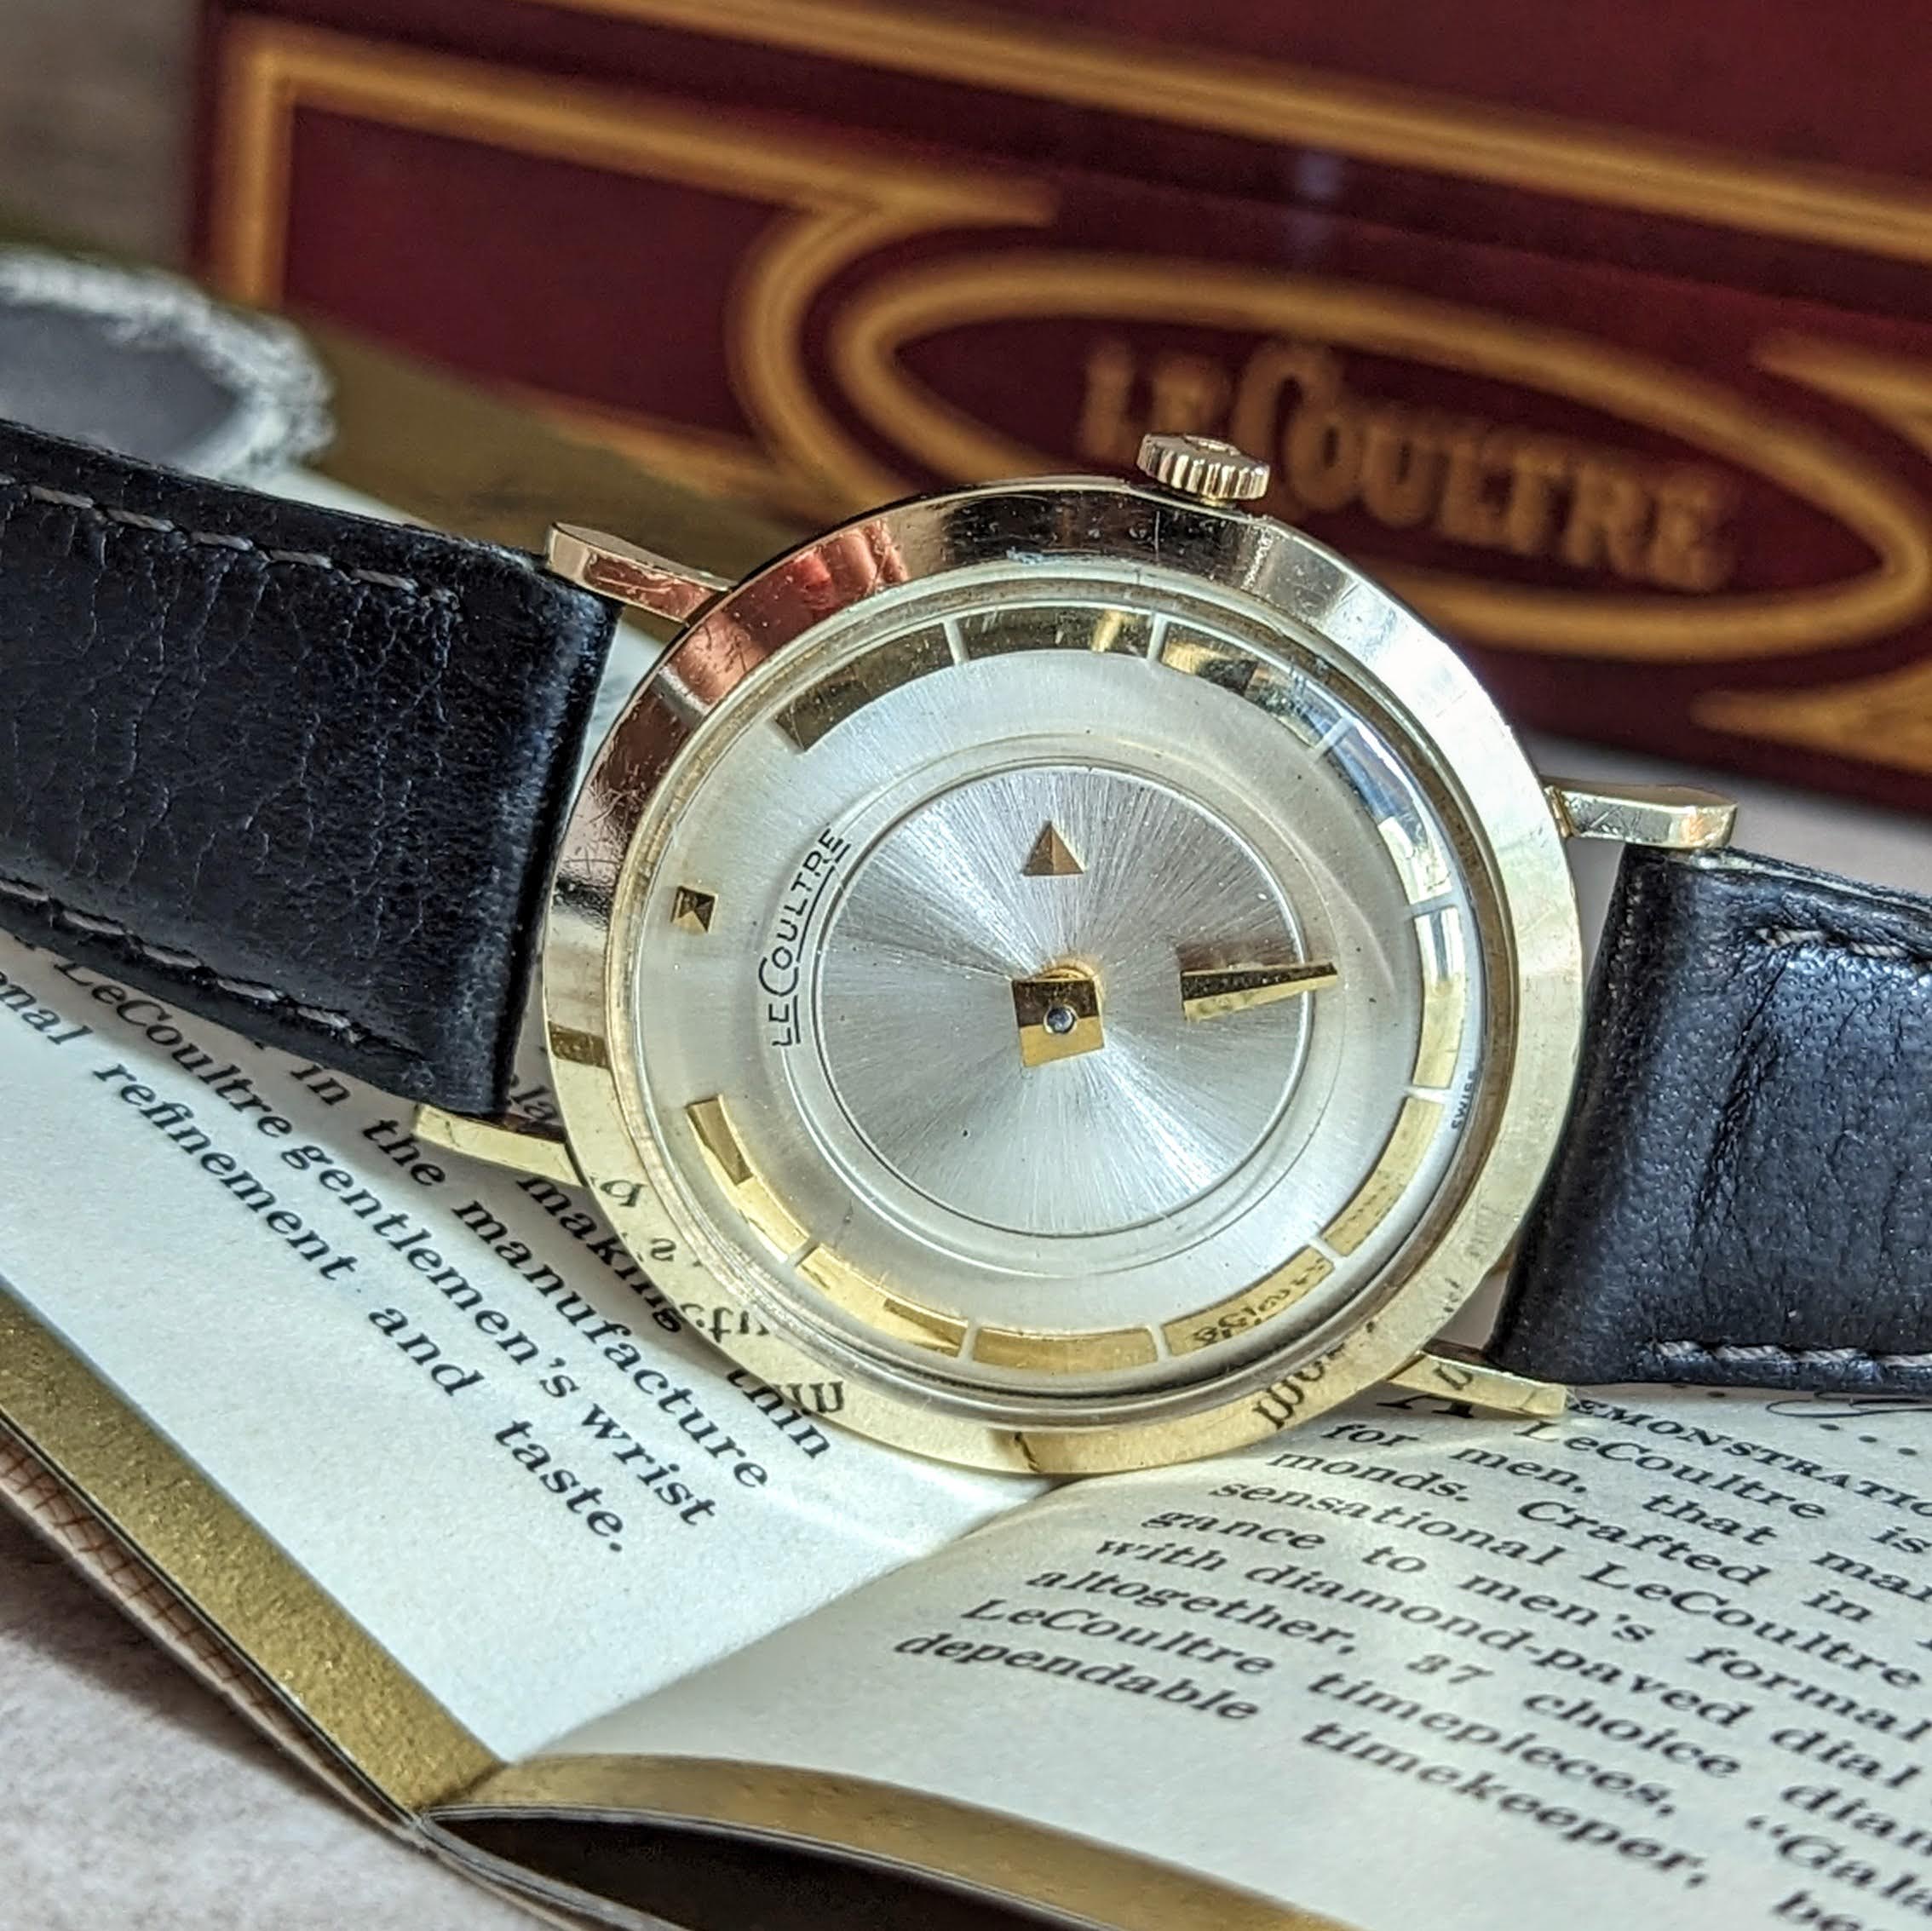 1959 LeCoultre Mystery Dial Wristwatch Cal. K480/CW 17 Jewels Vintage Watch Box & Papers!